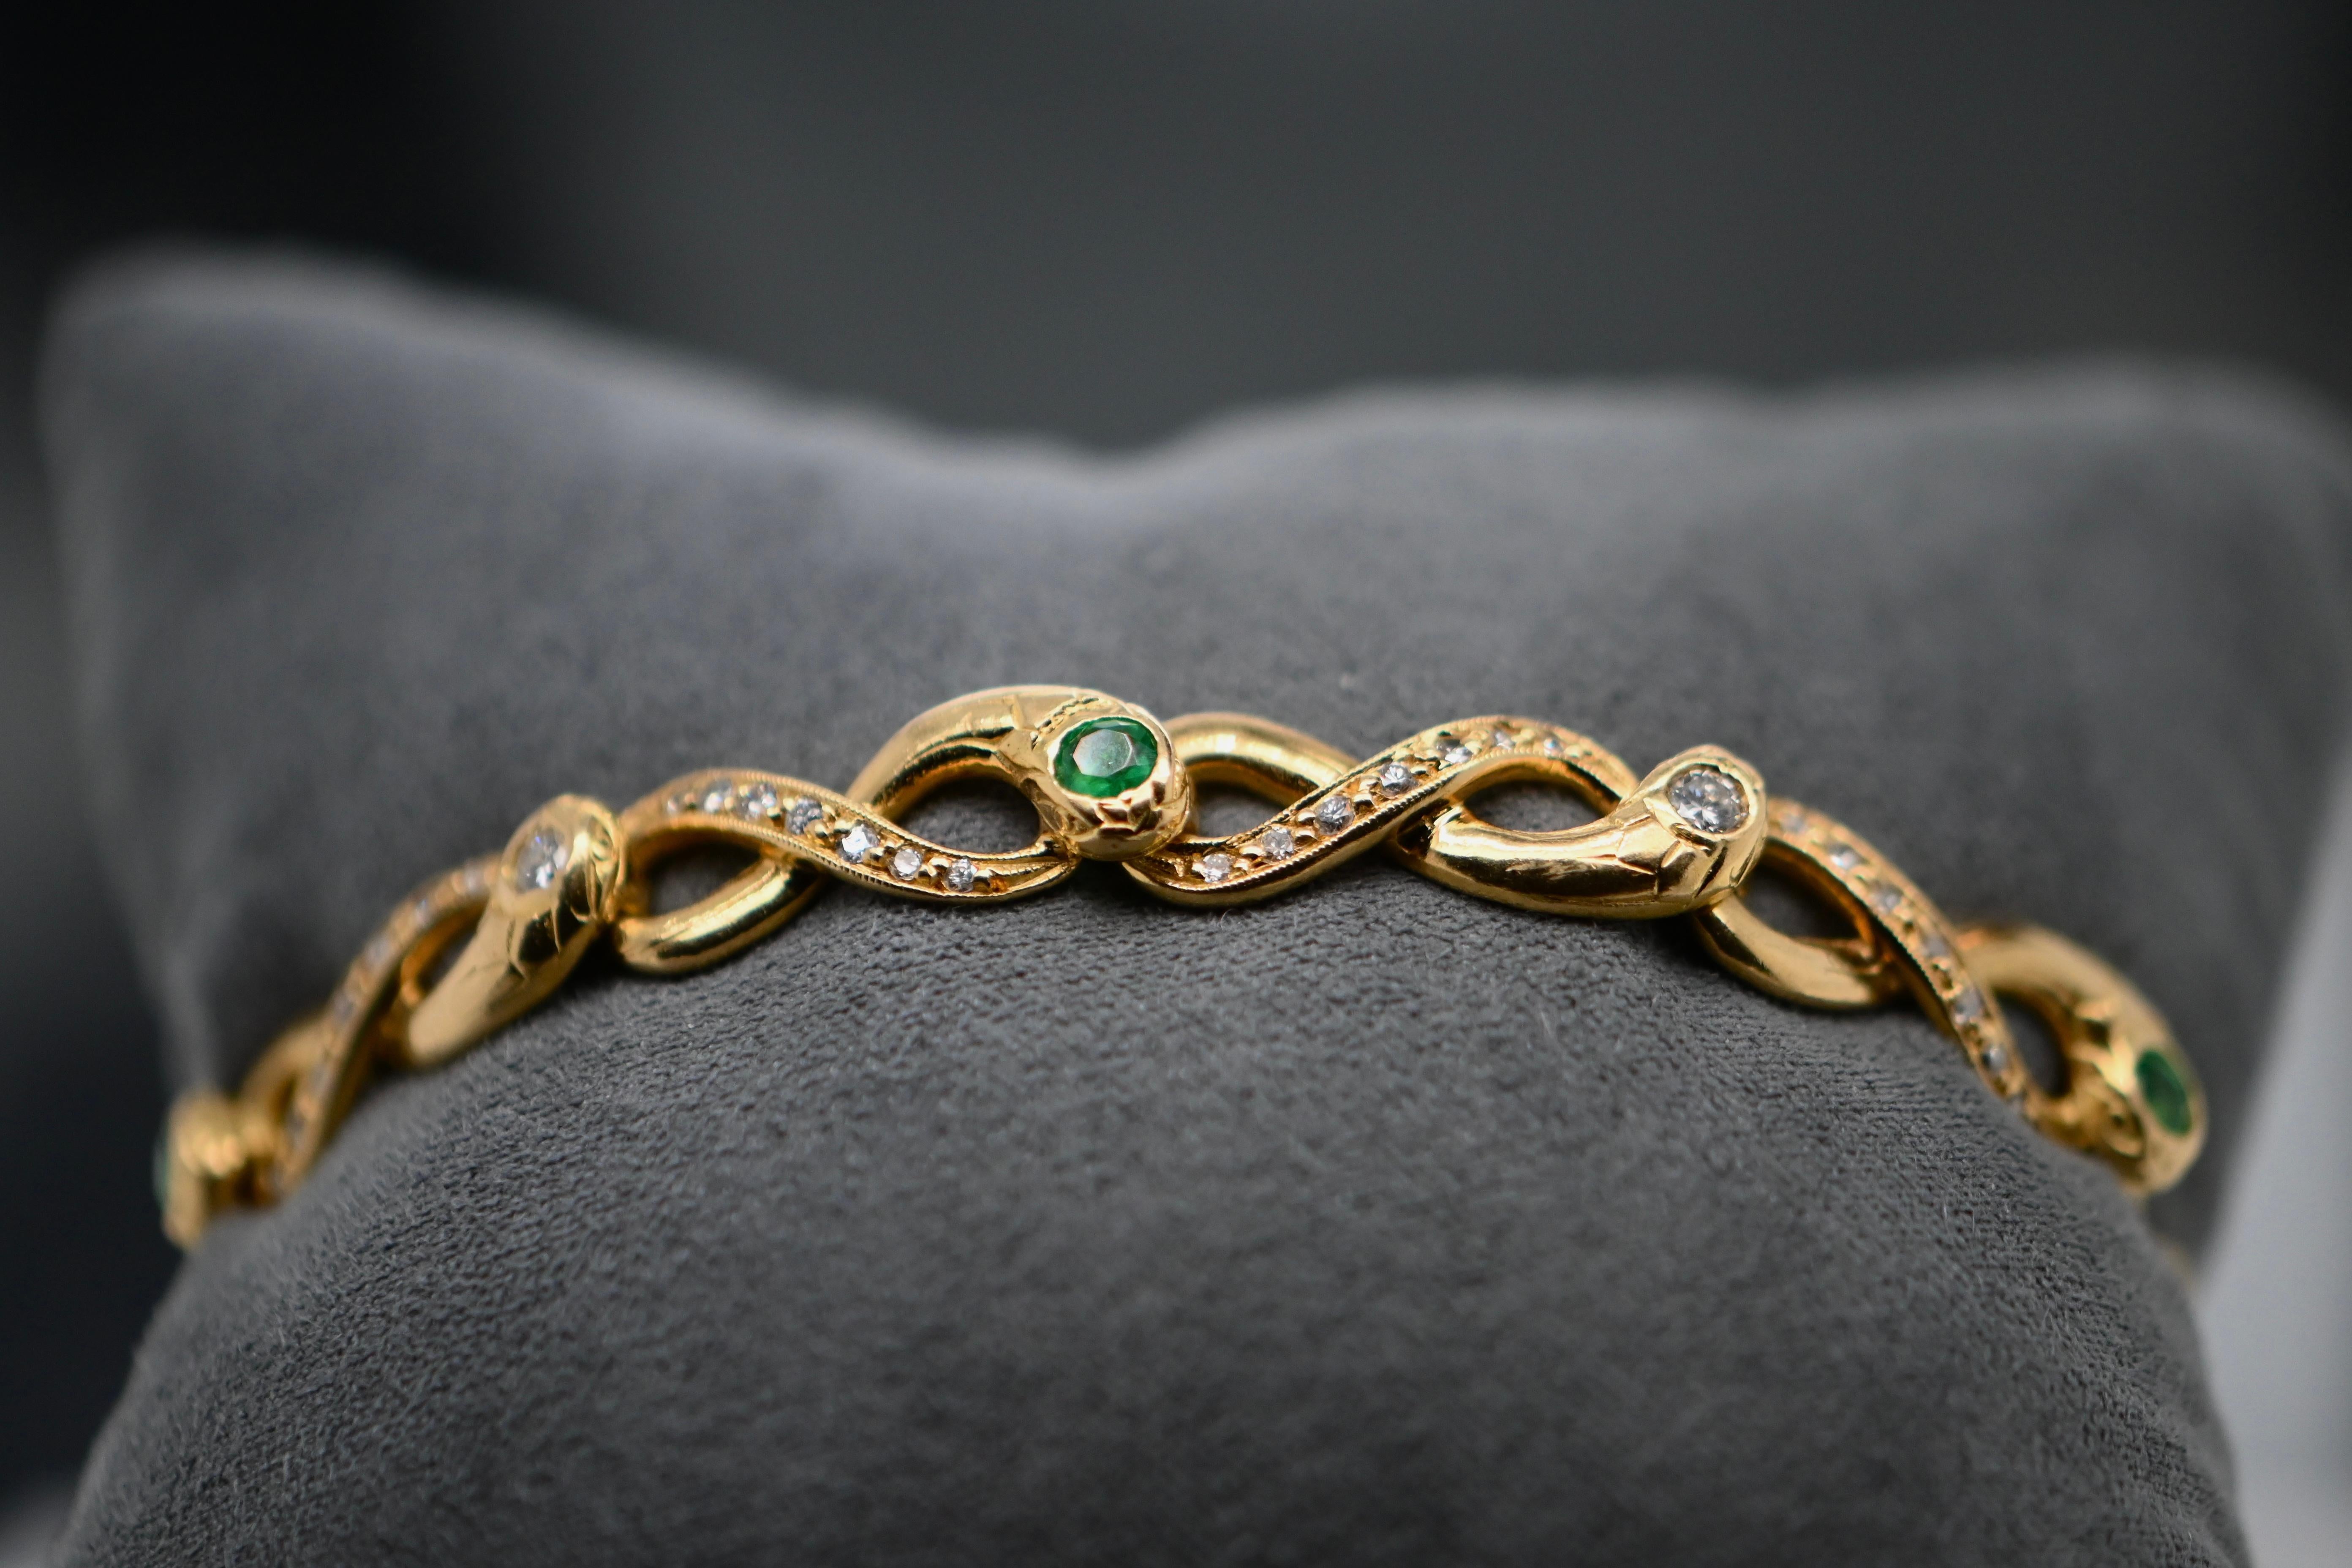 Welcome to Mesure et art du temps, your destination for exceptional jewelry and one-of-a-kind pieces. We are delighted to present this sumptuous retro-style 18-carat yellow gold bracelet, adorned with diamonds and emeralds, created by a talented